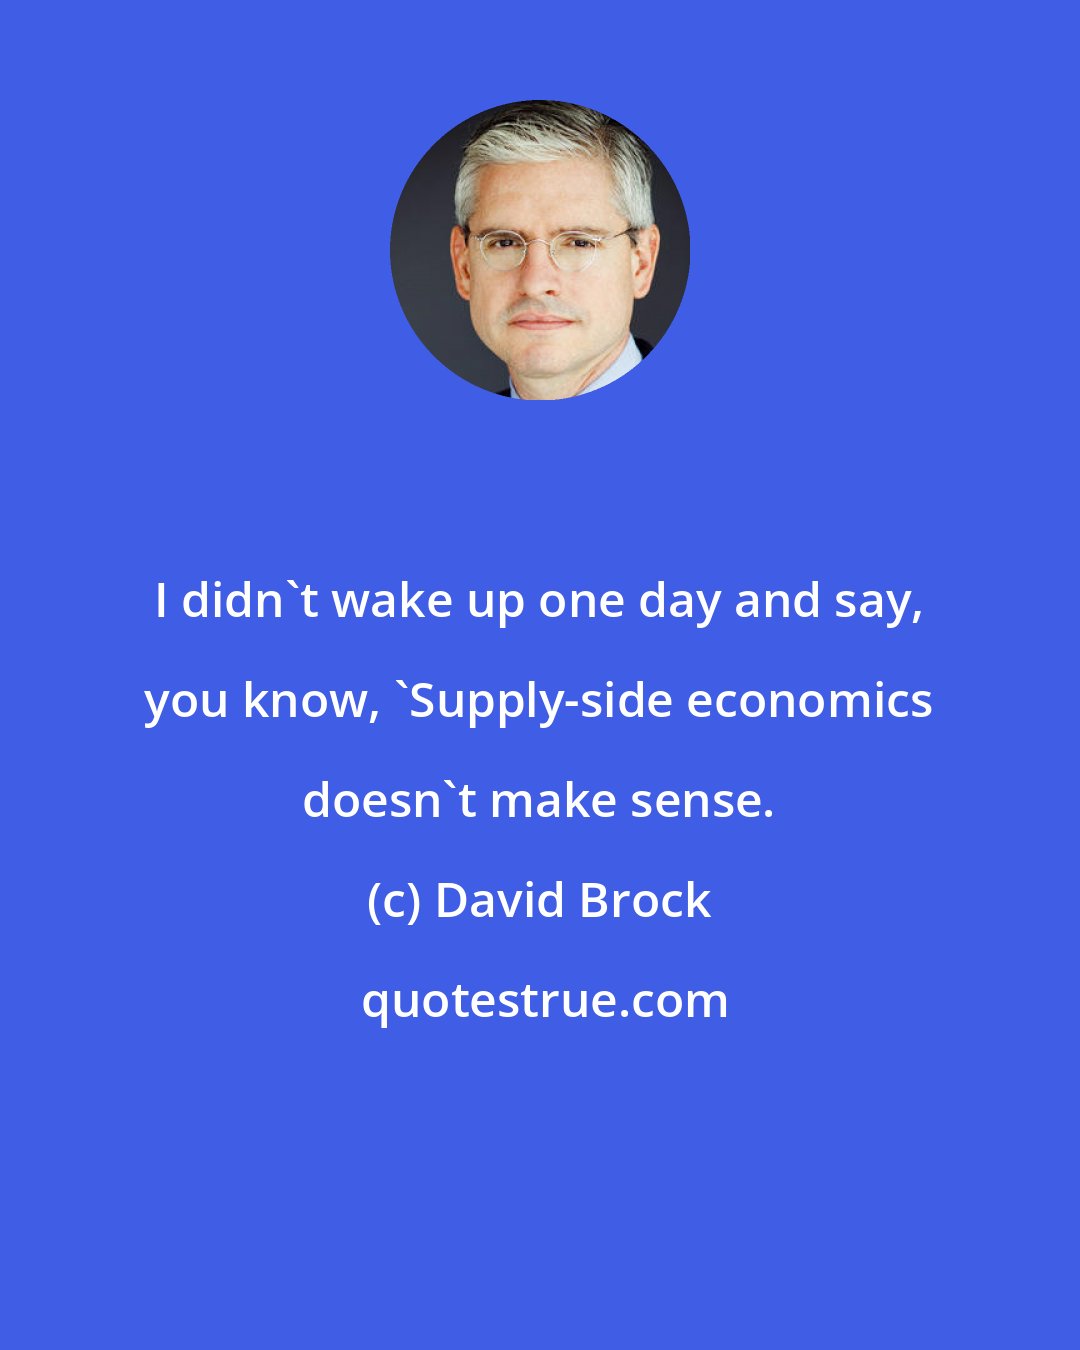 David Brock: I didn't wake up one day and say, you know, 'Supply-side economics doesn't make sense.